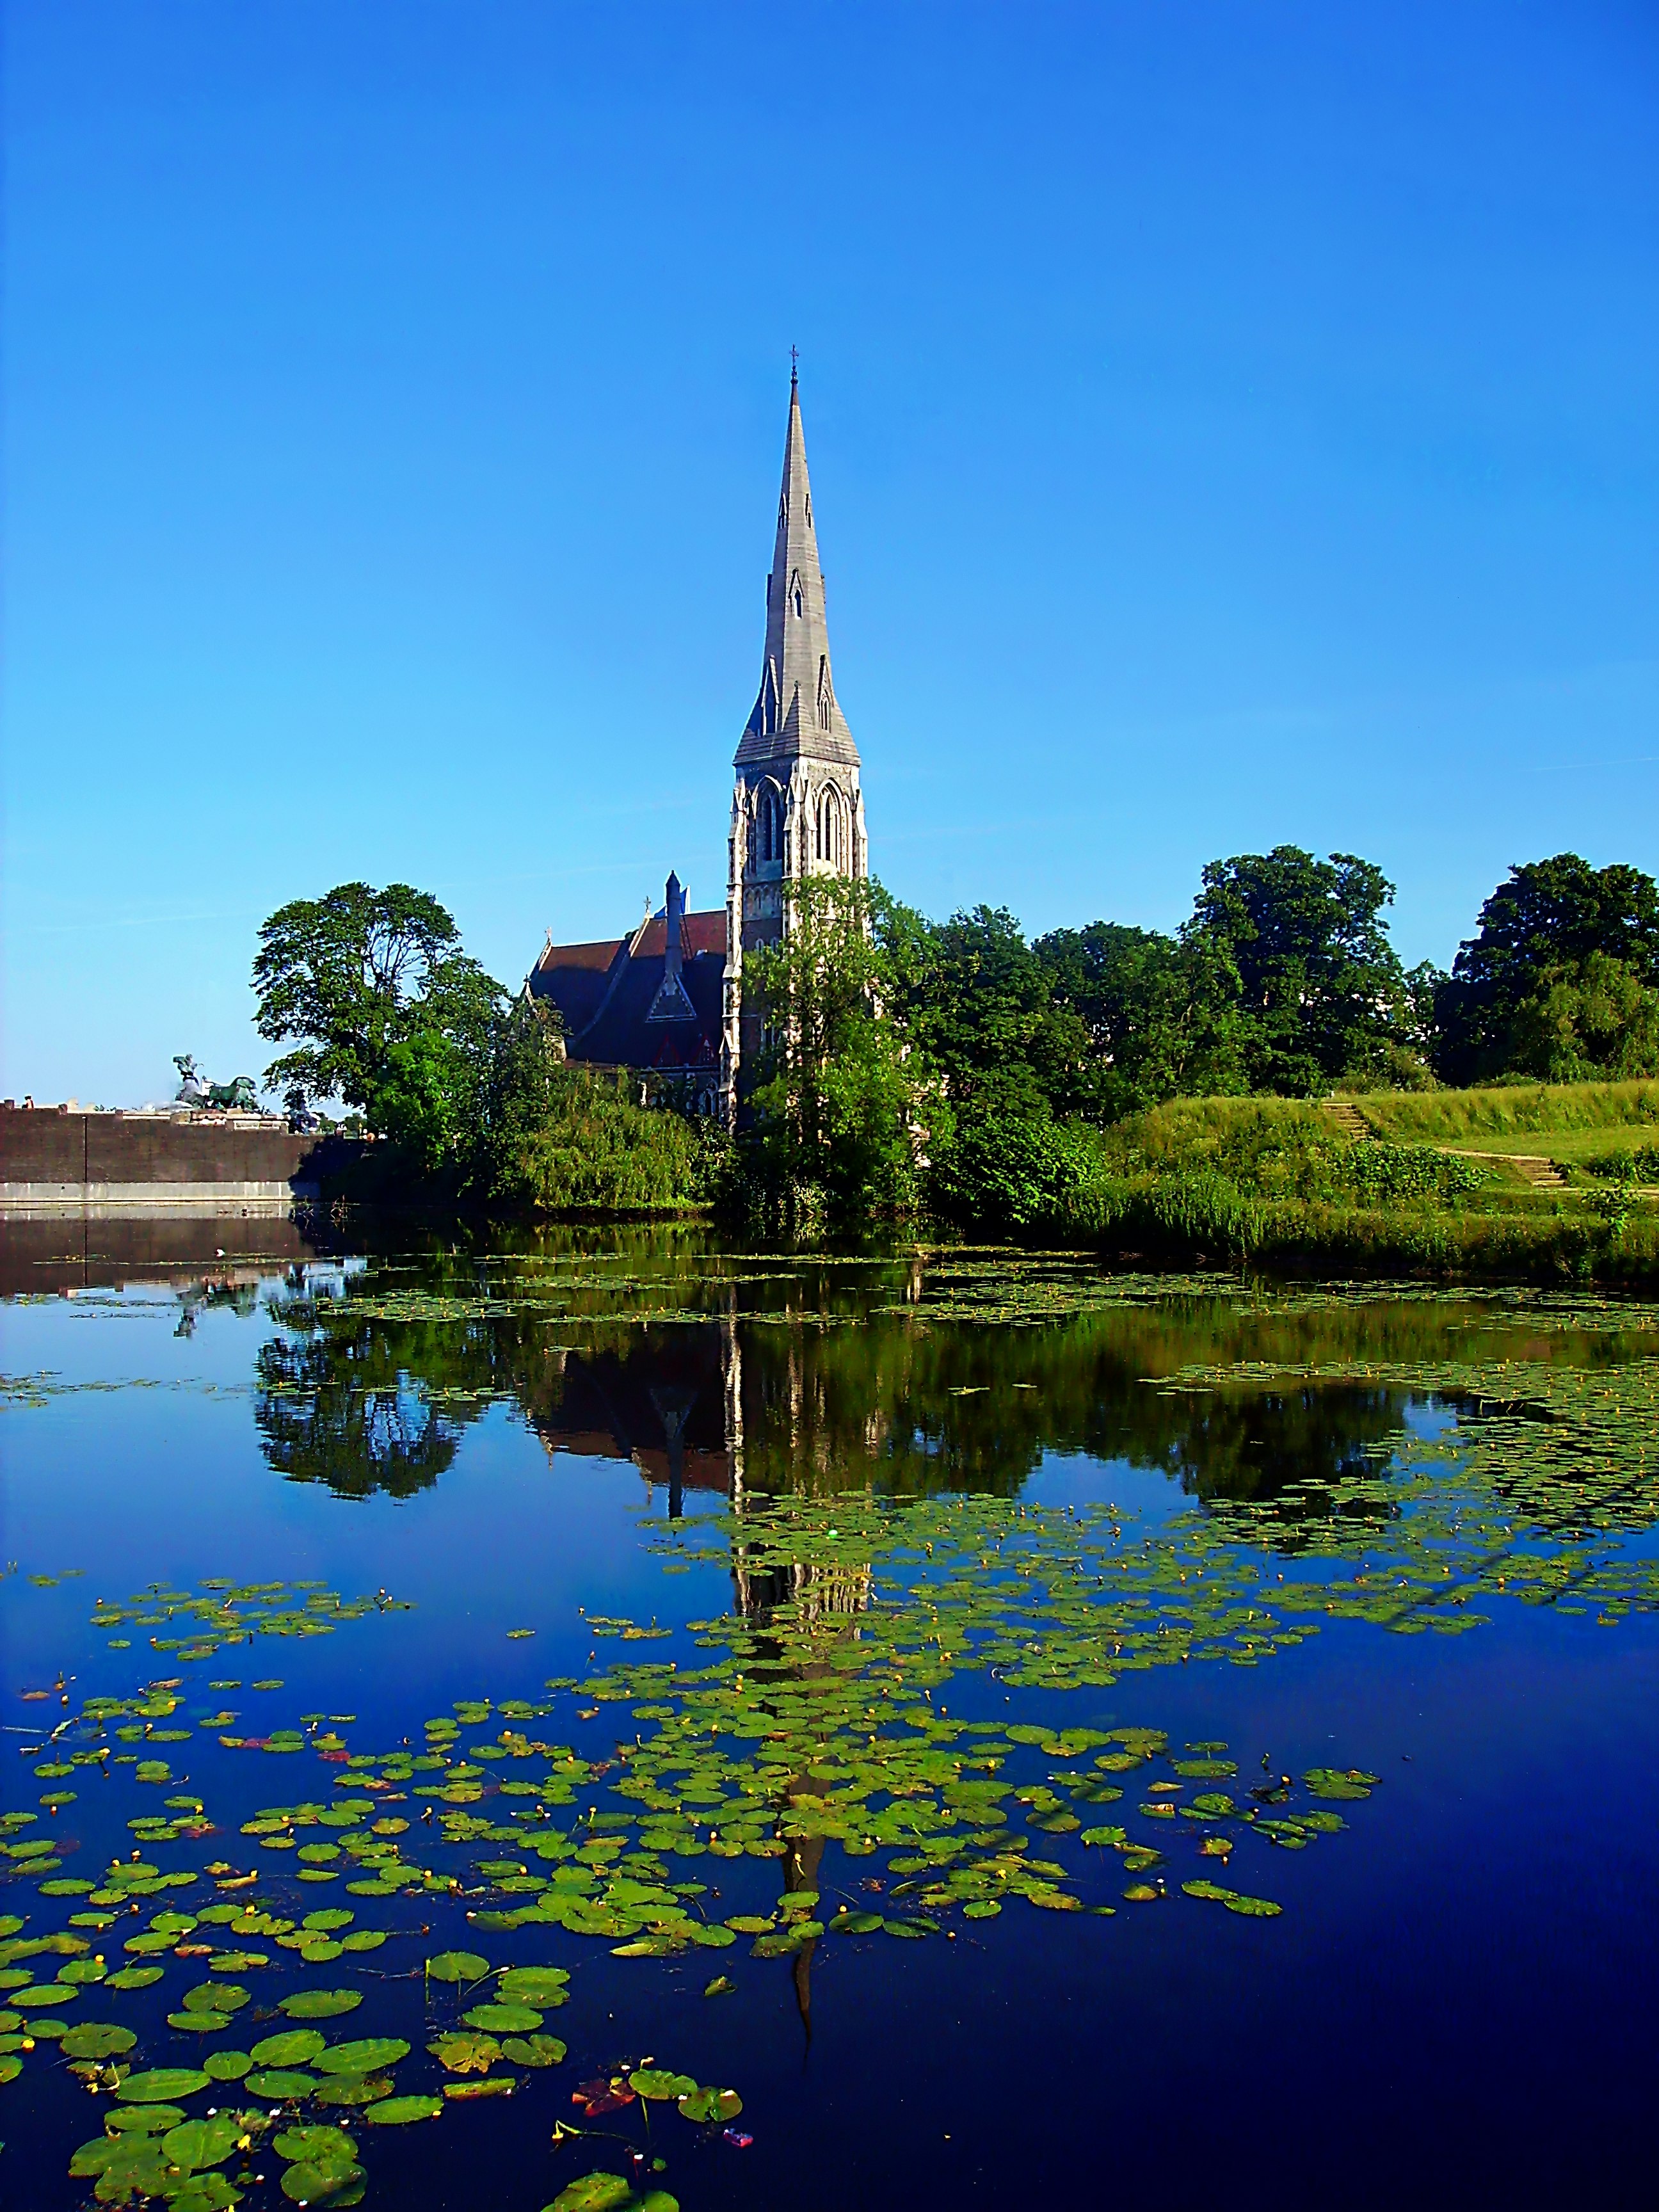 St. Alban's church near body of water under blue and white sky during daytime